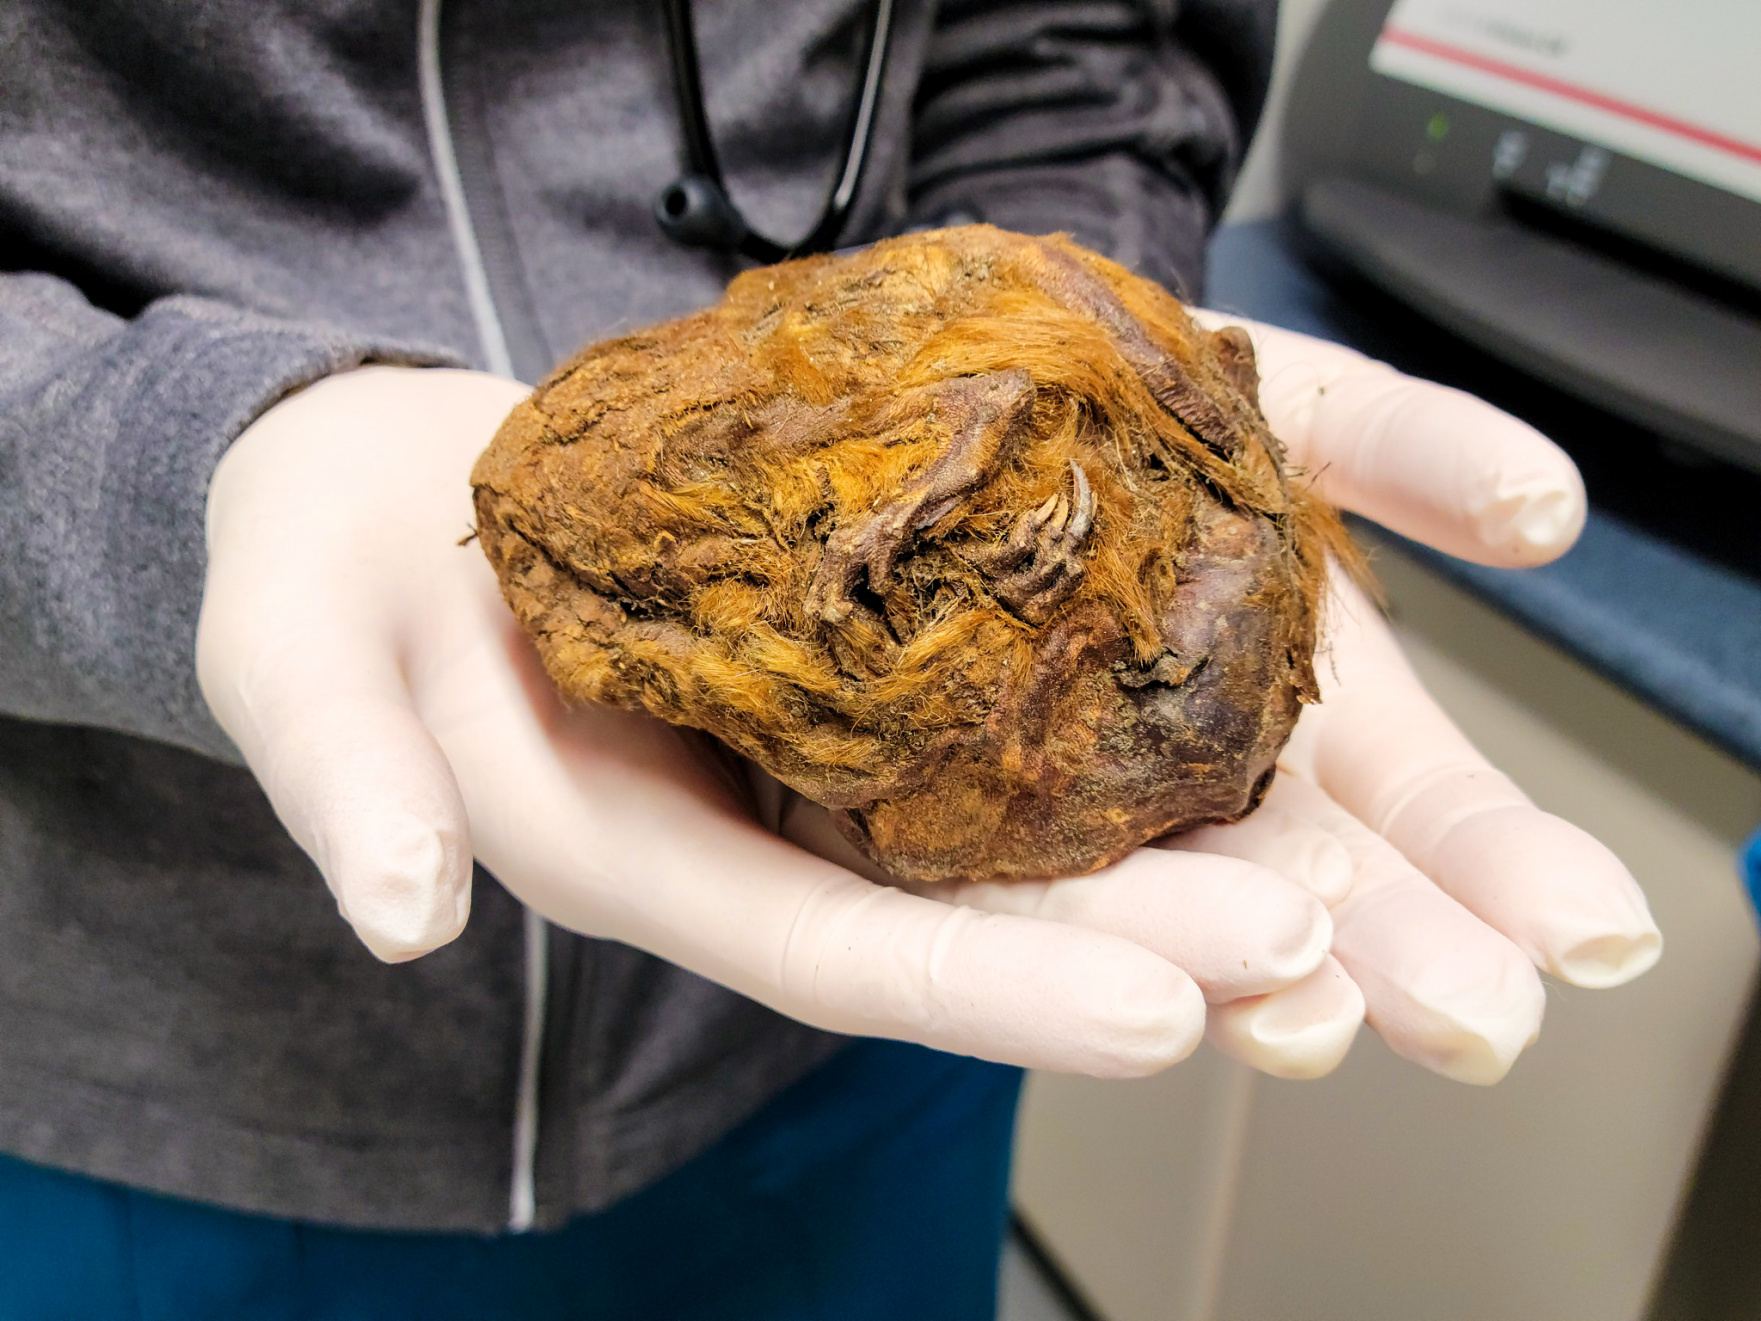 This lump of fur and claws is actually a balled-up mummified squirrel.